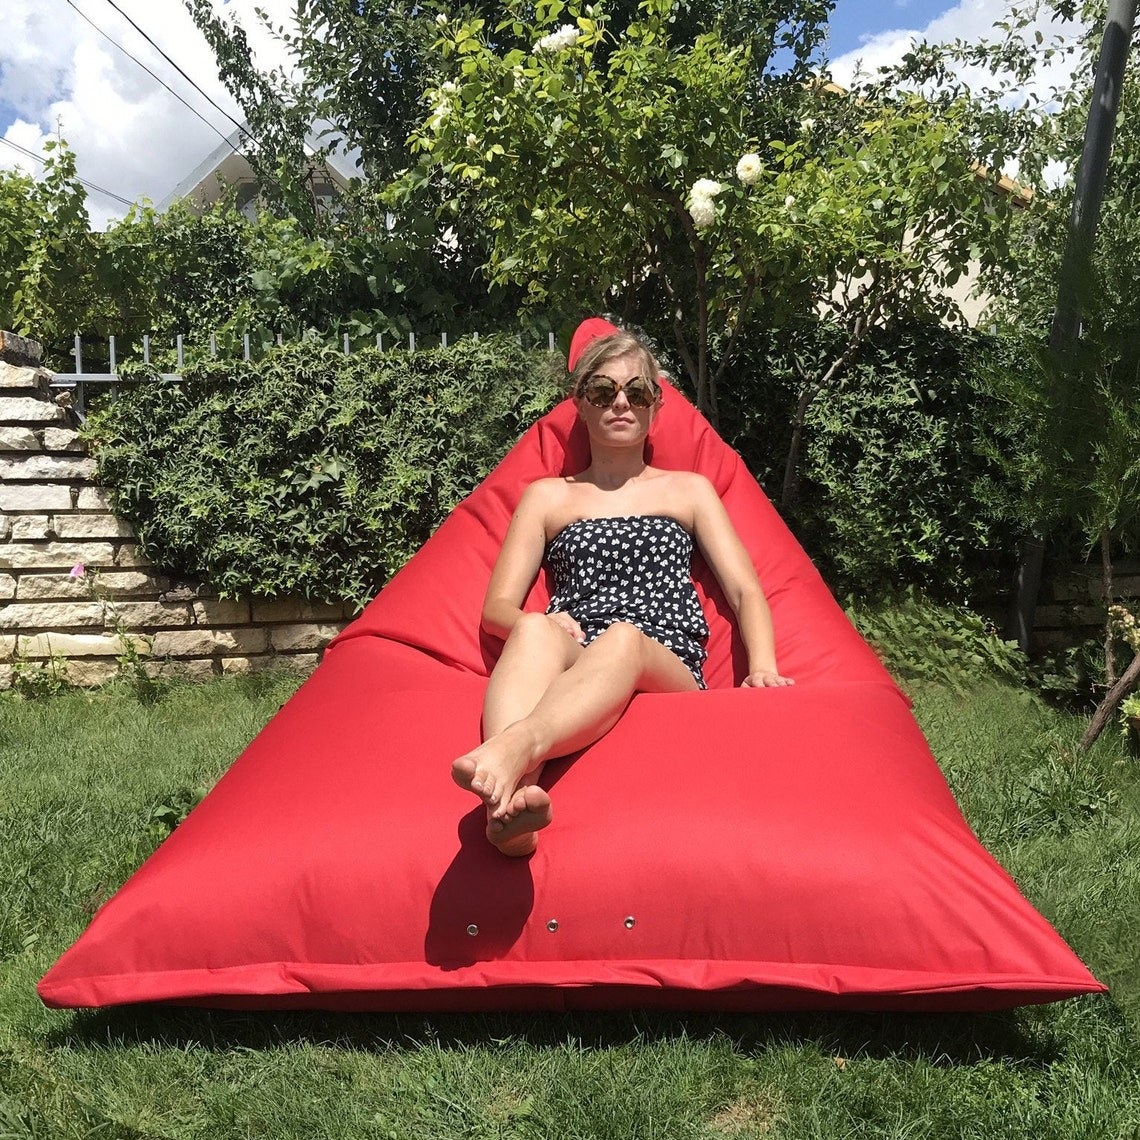 Model sitting on red bean bag chair